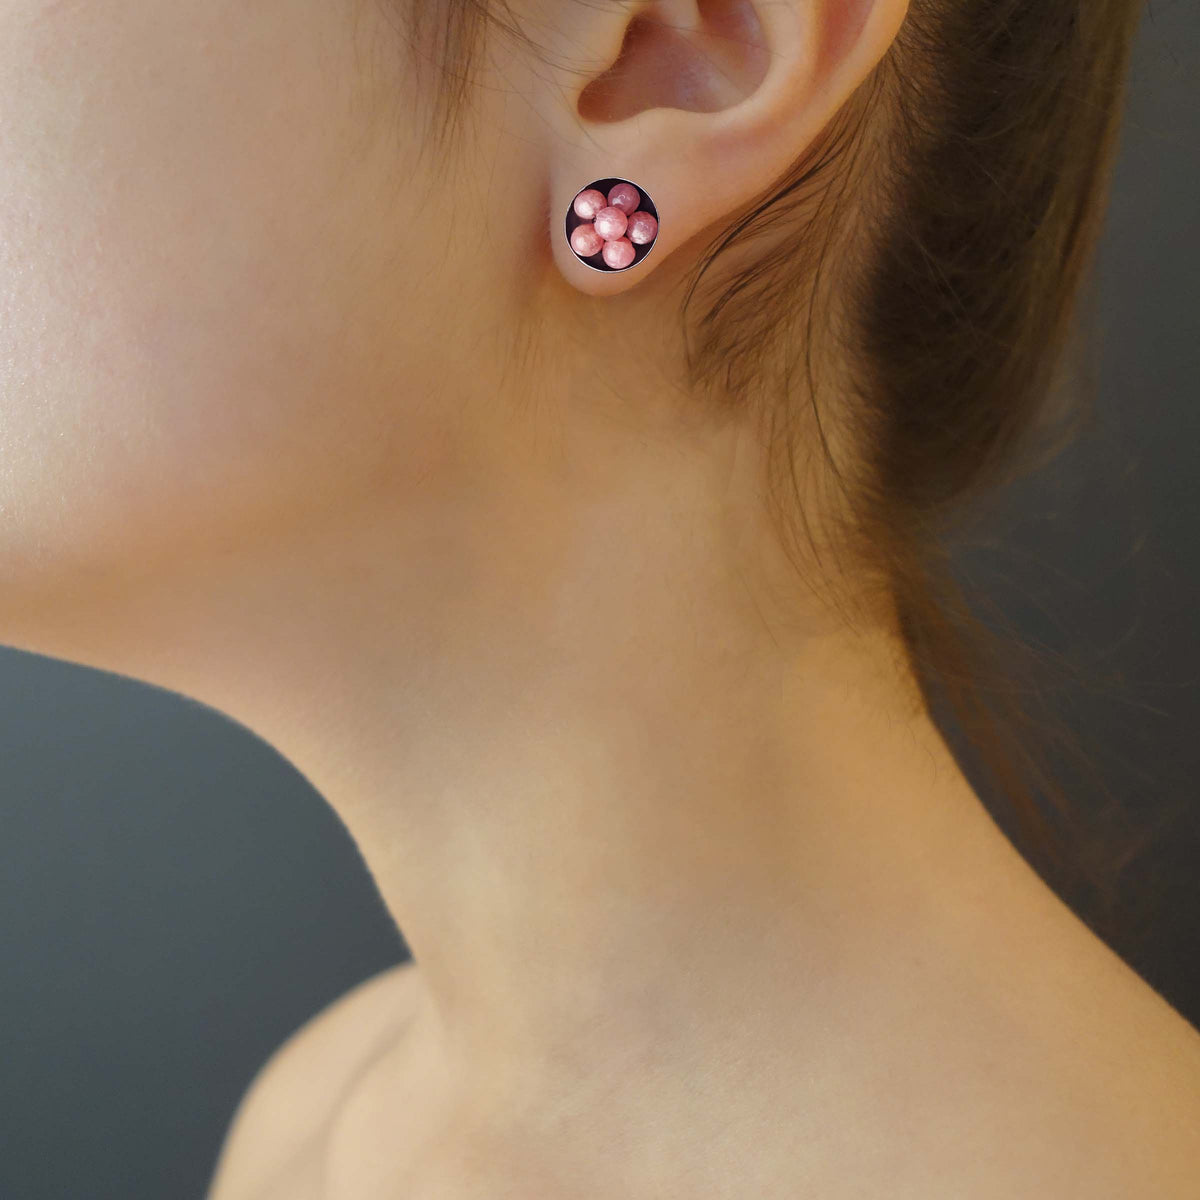 Lift Her Up in Peace: rhodocrosite post earring